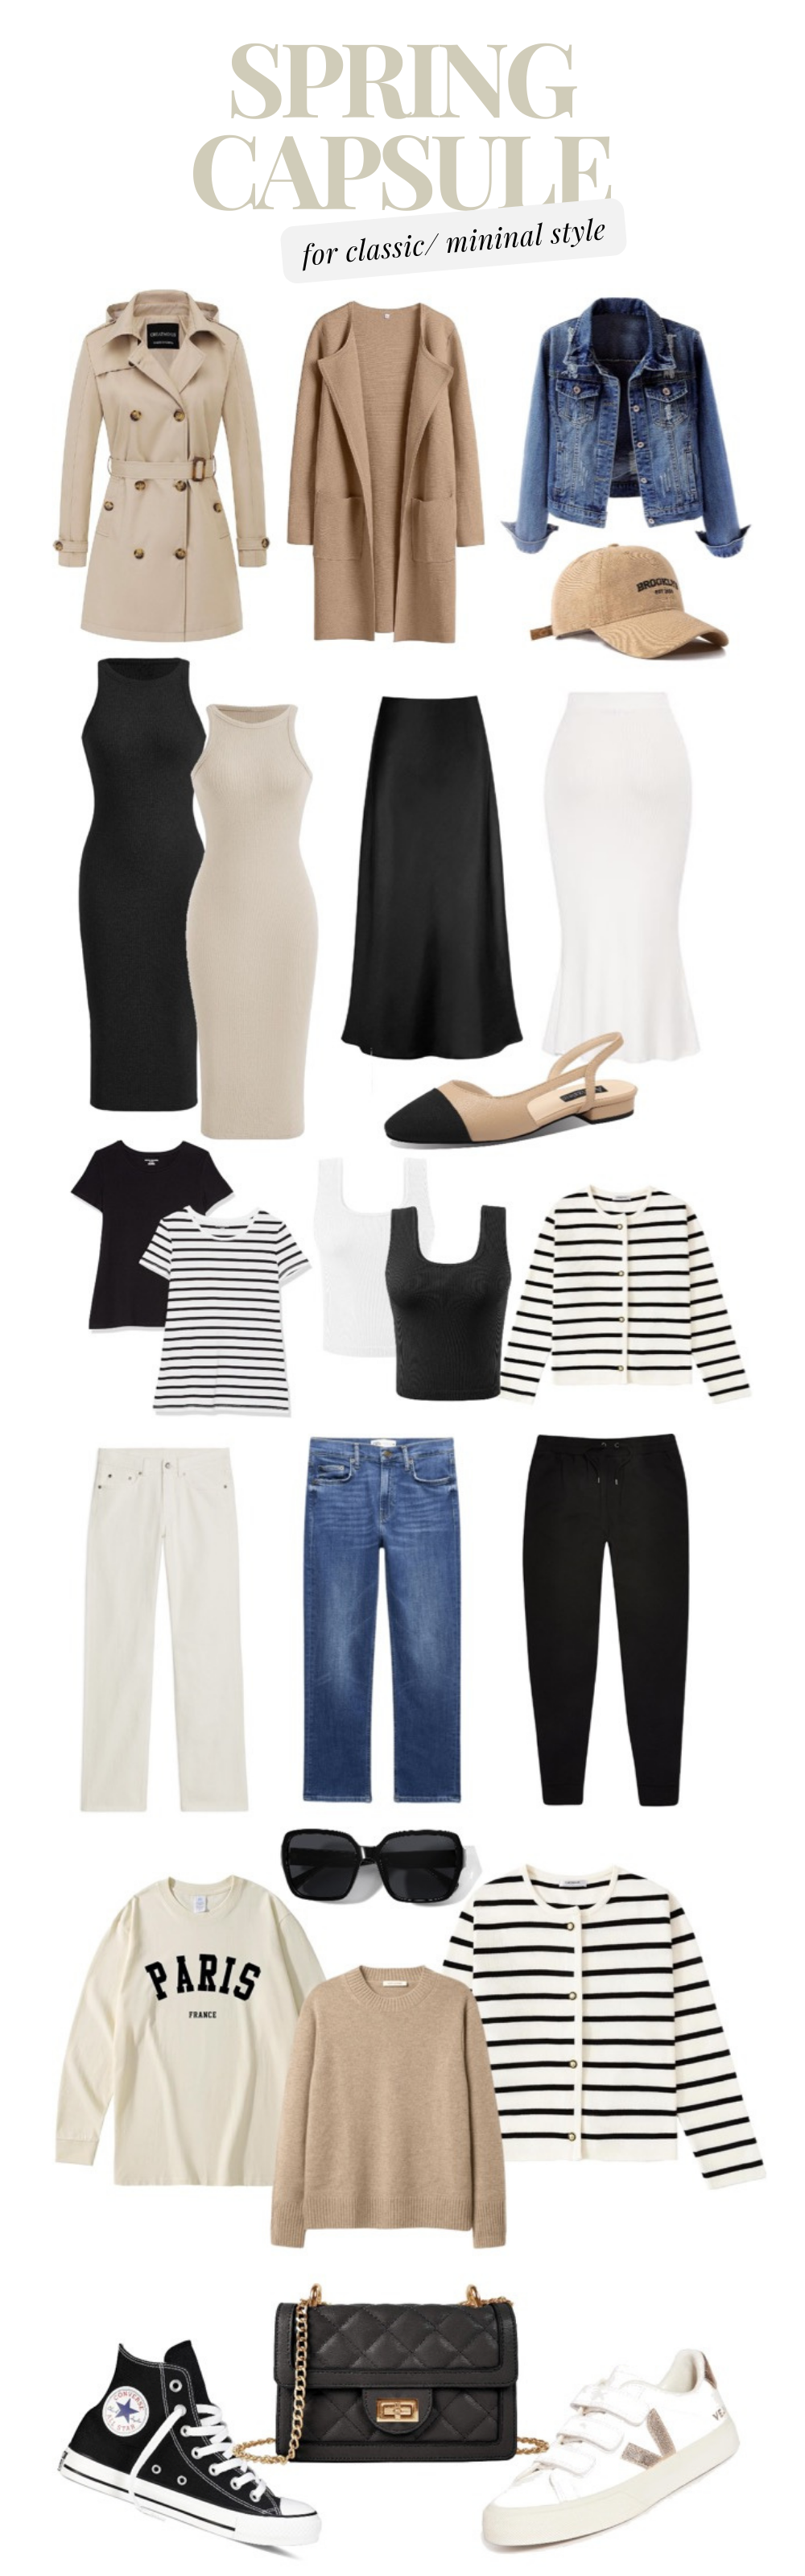 Spring capsule wardrobe for classic / minimal style 